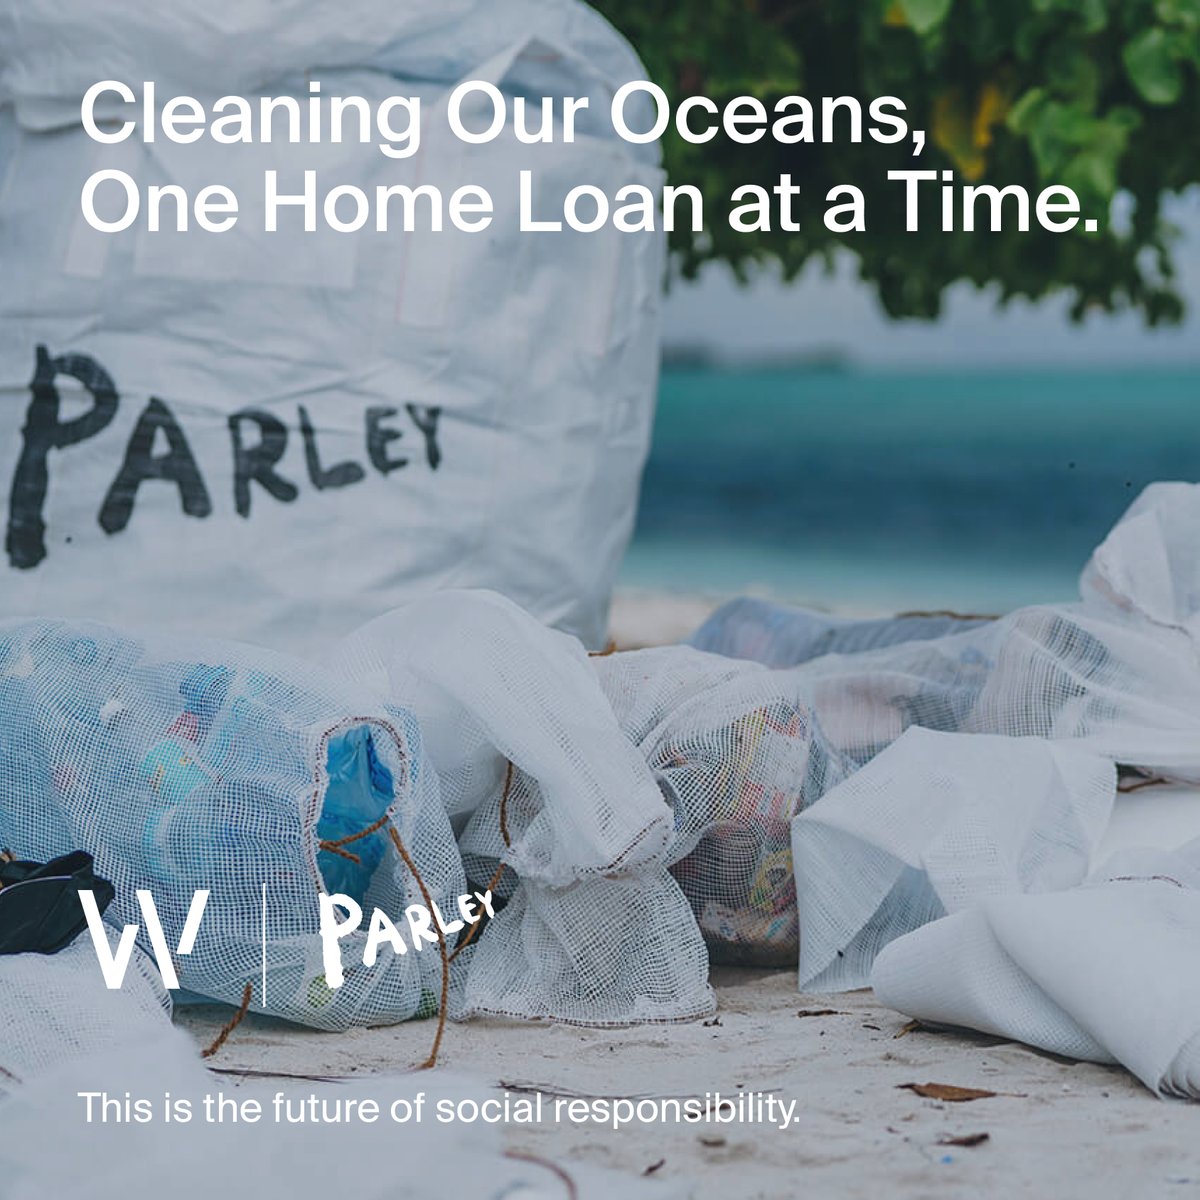 For every loan settled by WLTH, we will empower and assist Parley for the Oceans to clean up 50m² of Australian beach and coastline.

#mission #loansfortheoceans #parley